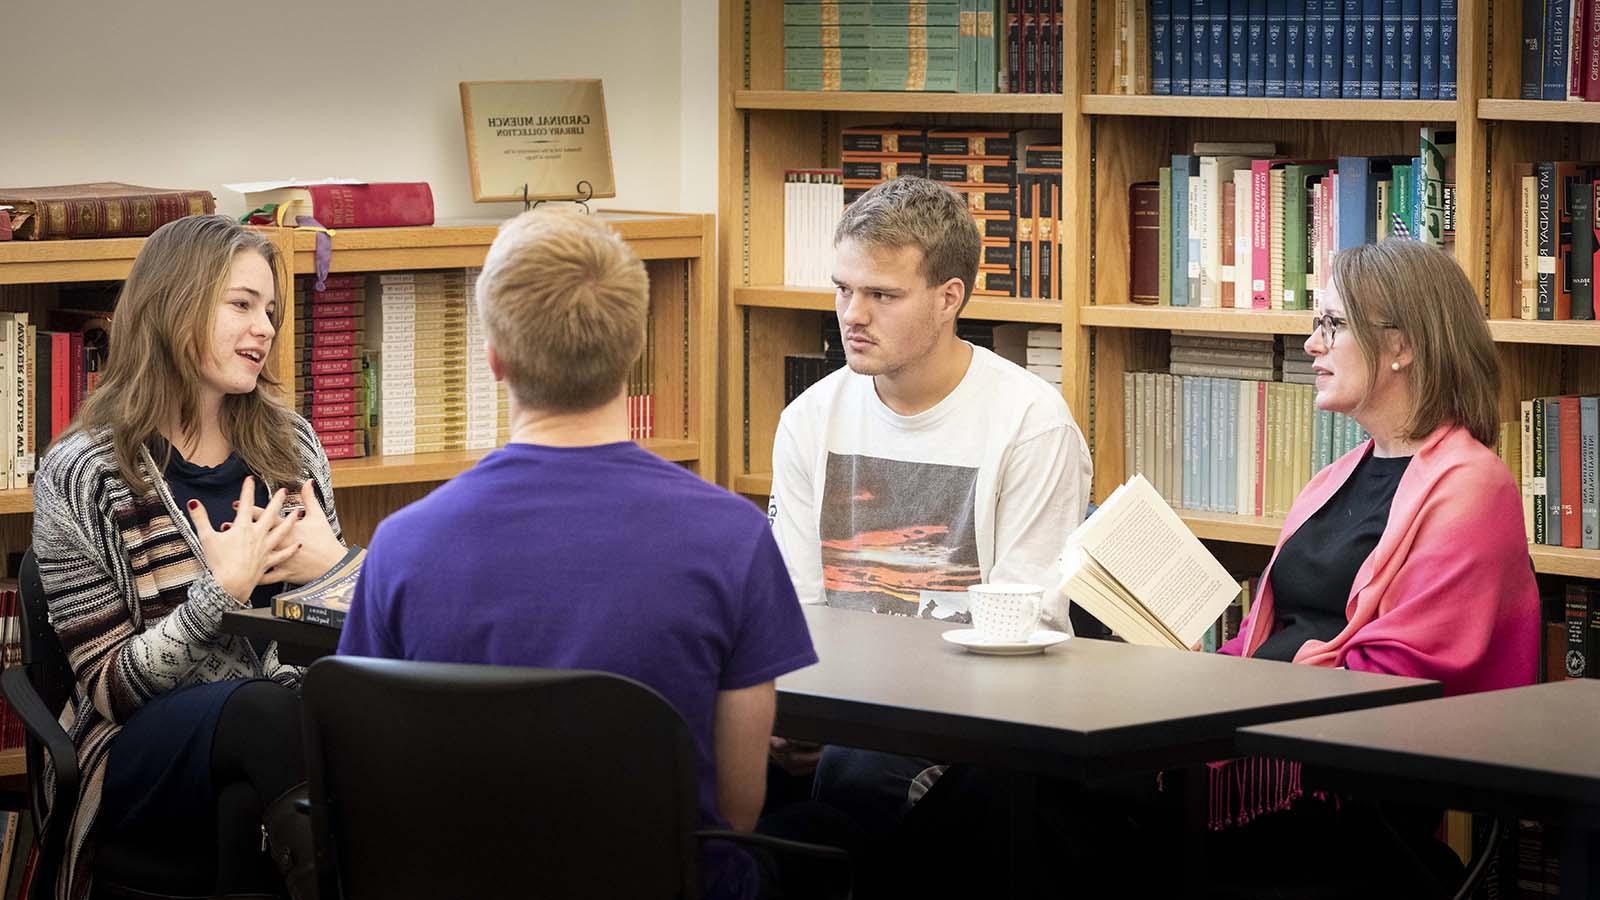 Three Catholic studies students in informal discussion with professor